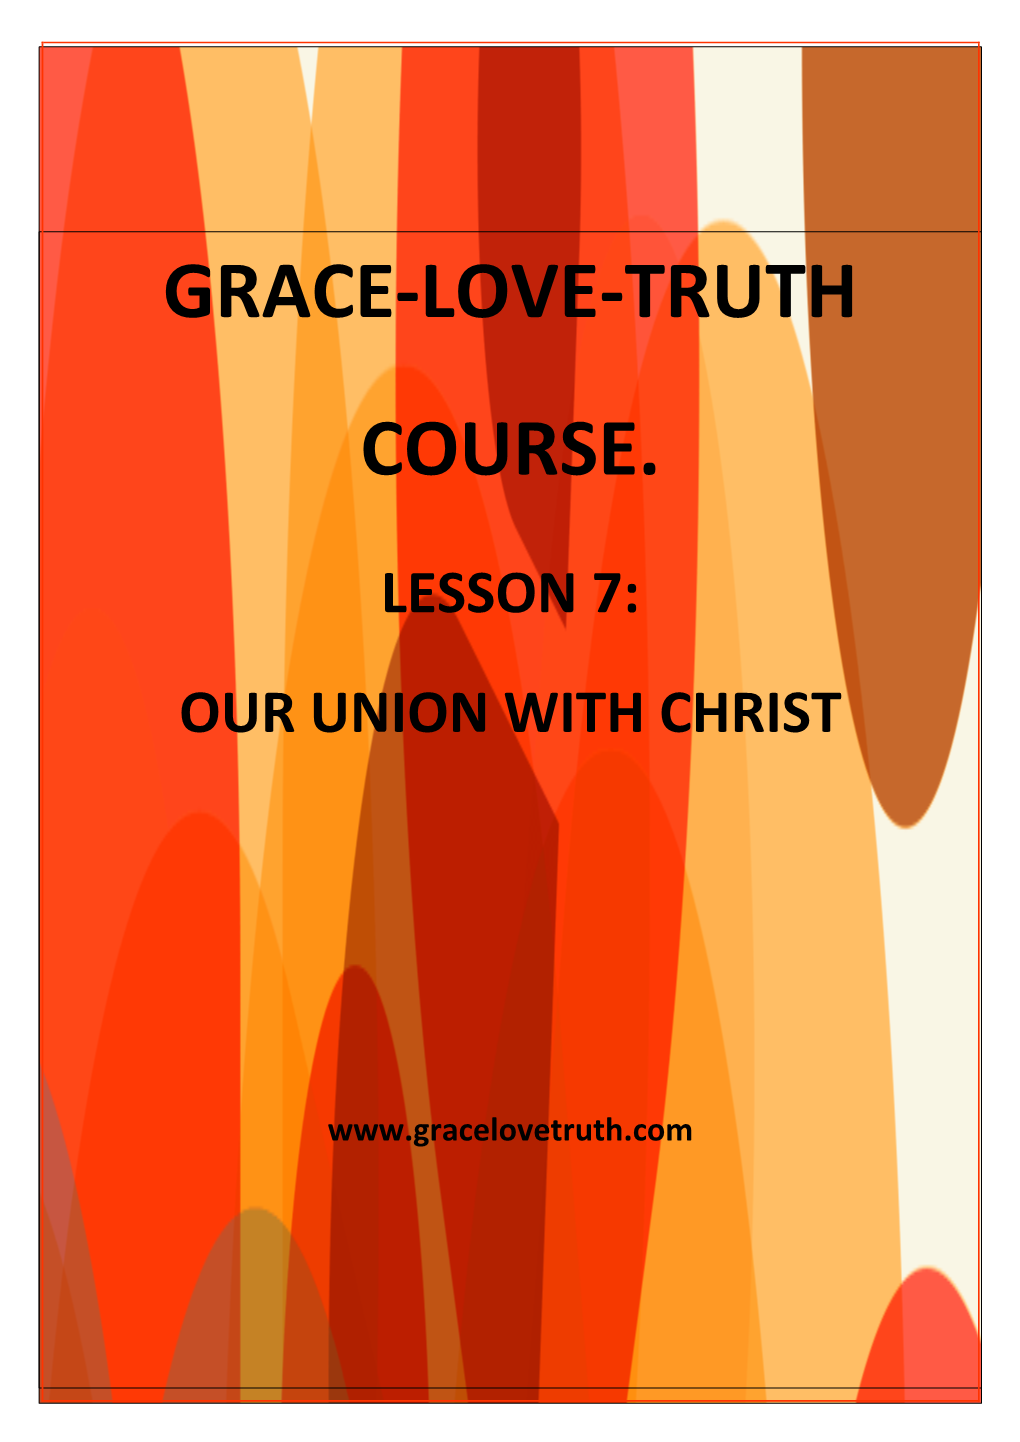 Lesson 7: Our Union with Christ